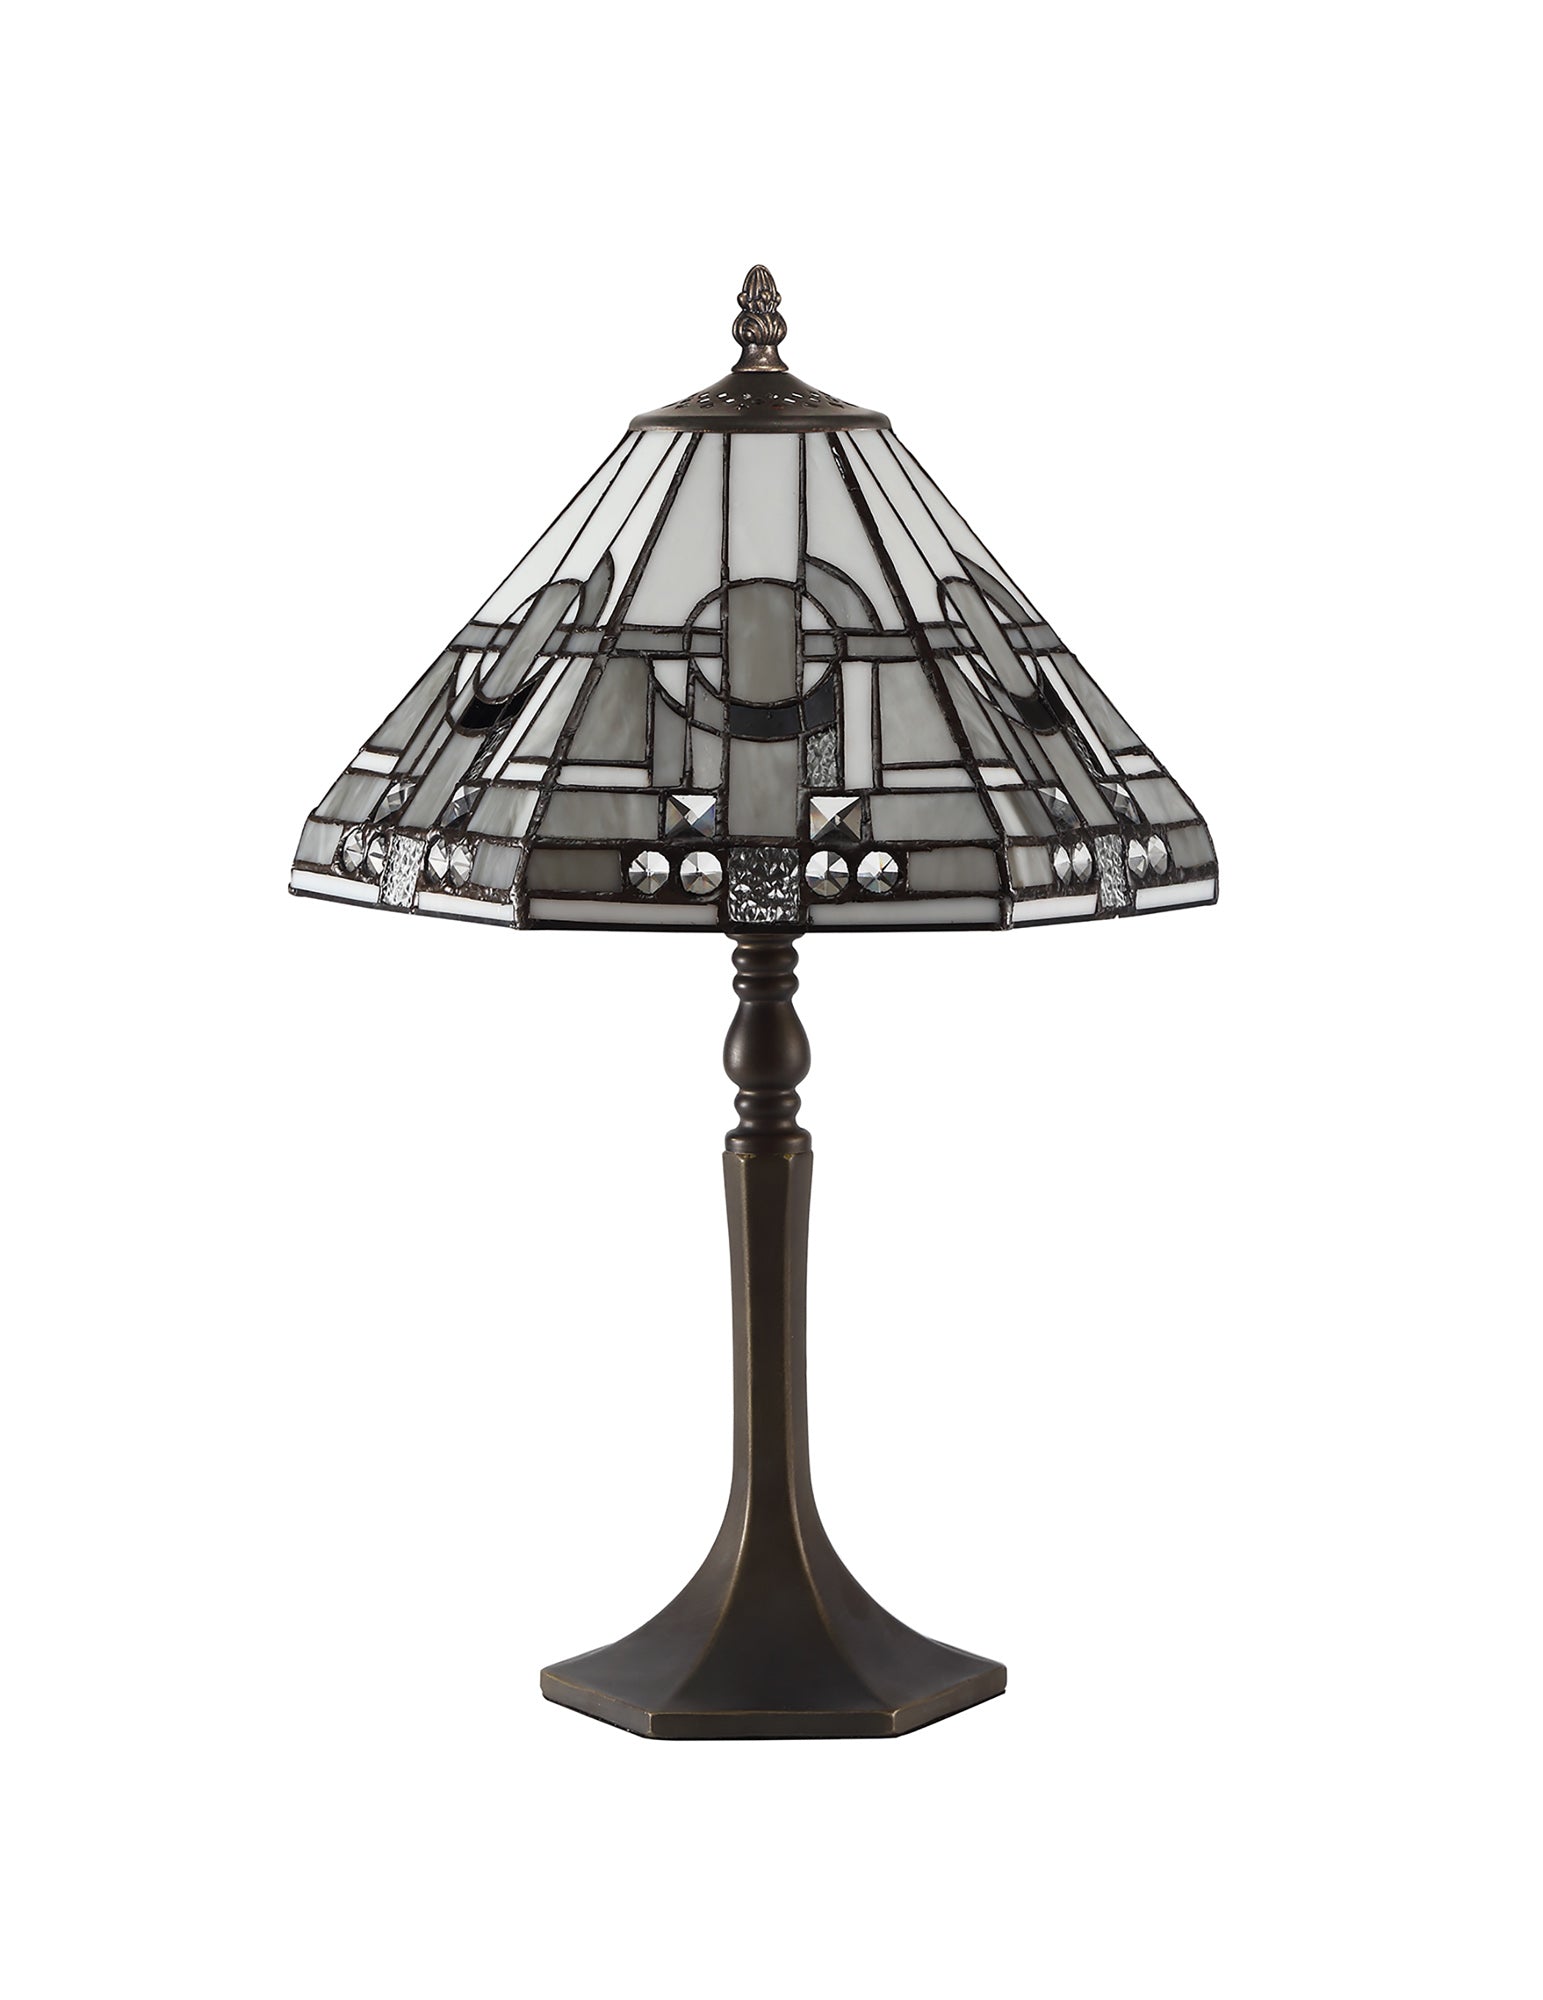 Atek 1 Light Octagonal Table Lamp E27 With 30cm Tiffany Shade, White/Grey/Black/Clear Crystal/Aged Antique Brass